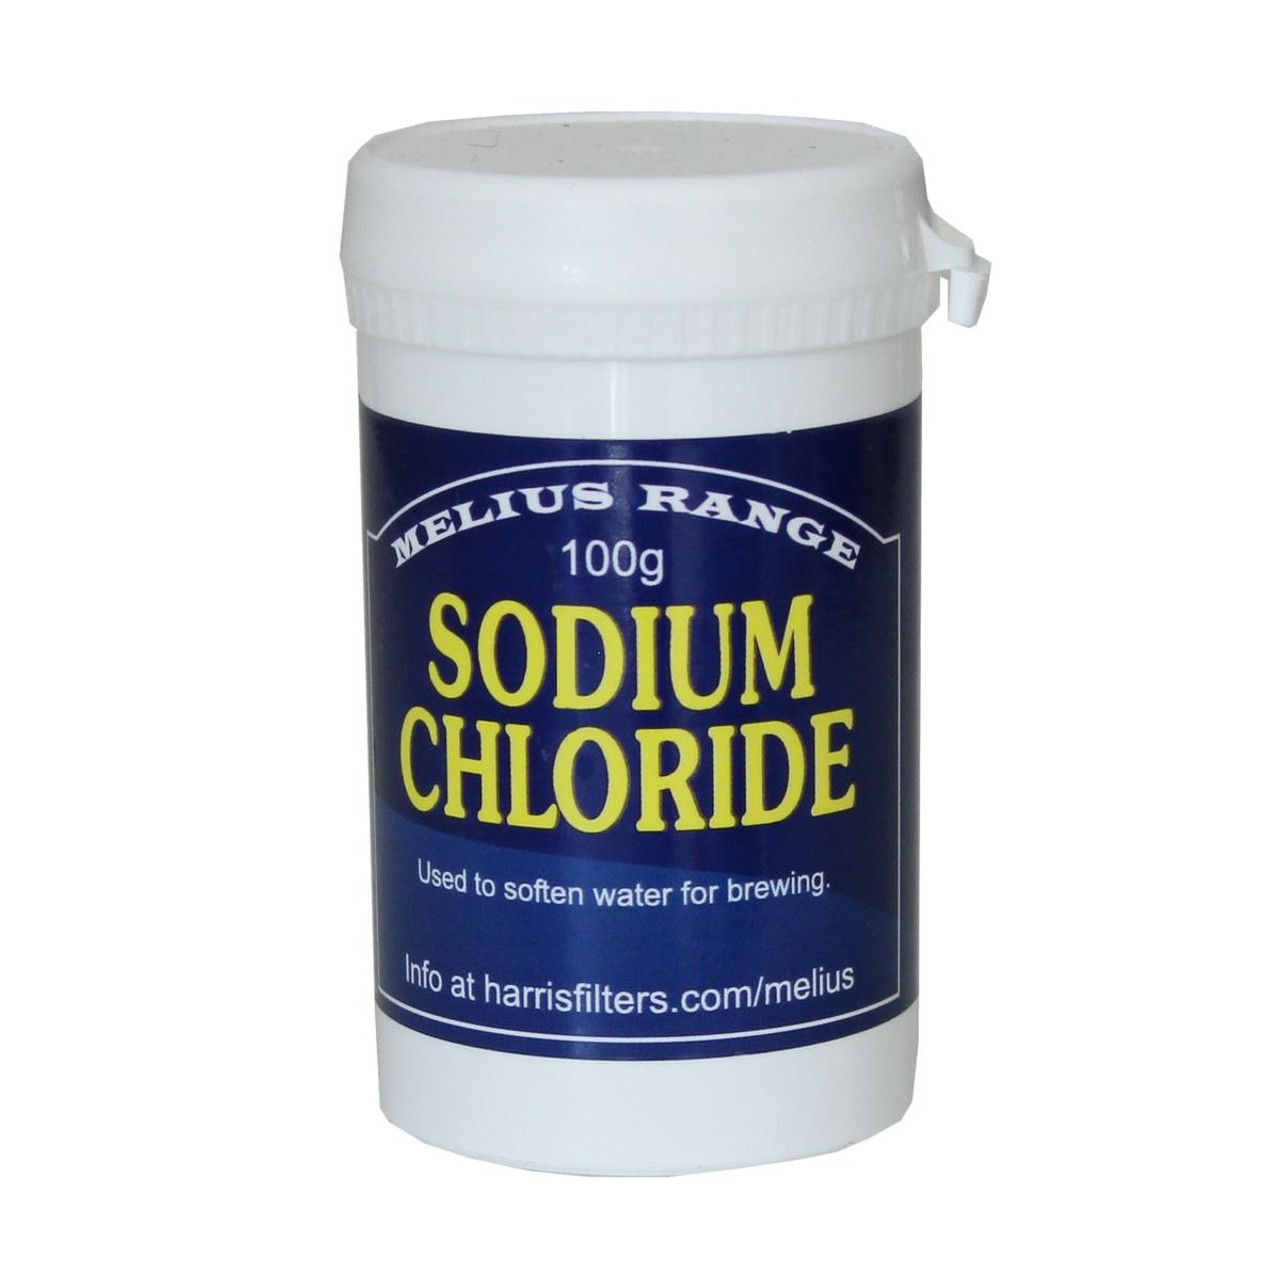 Sodium Chloride 100g Home brew Beer Making